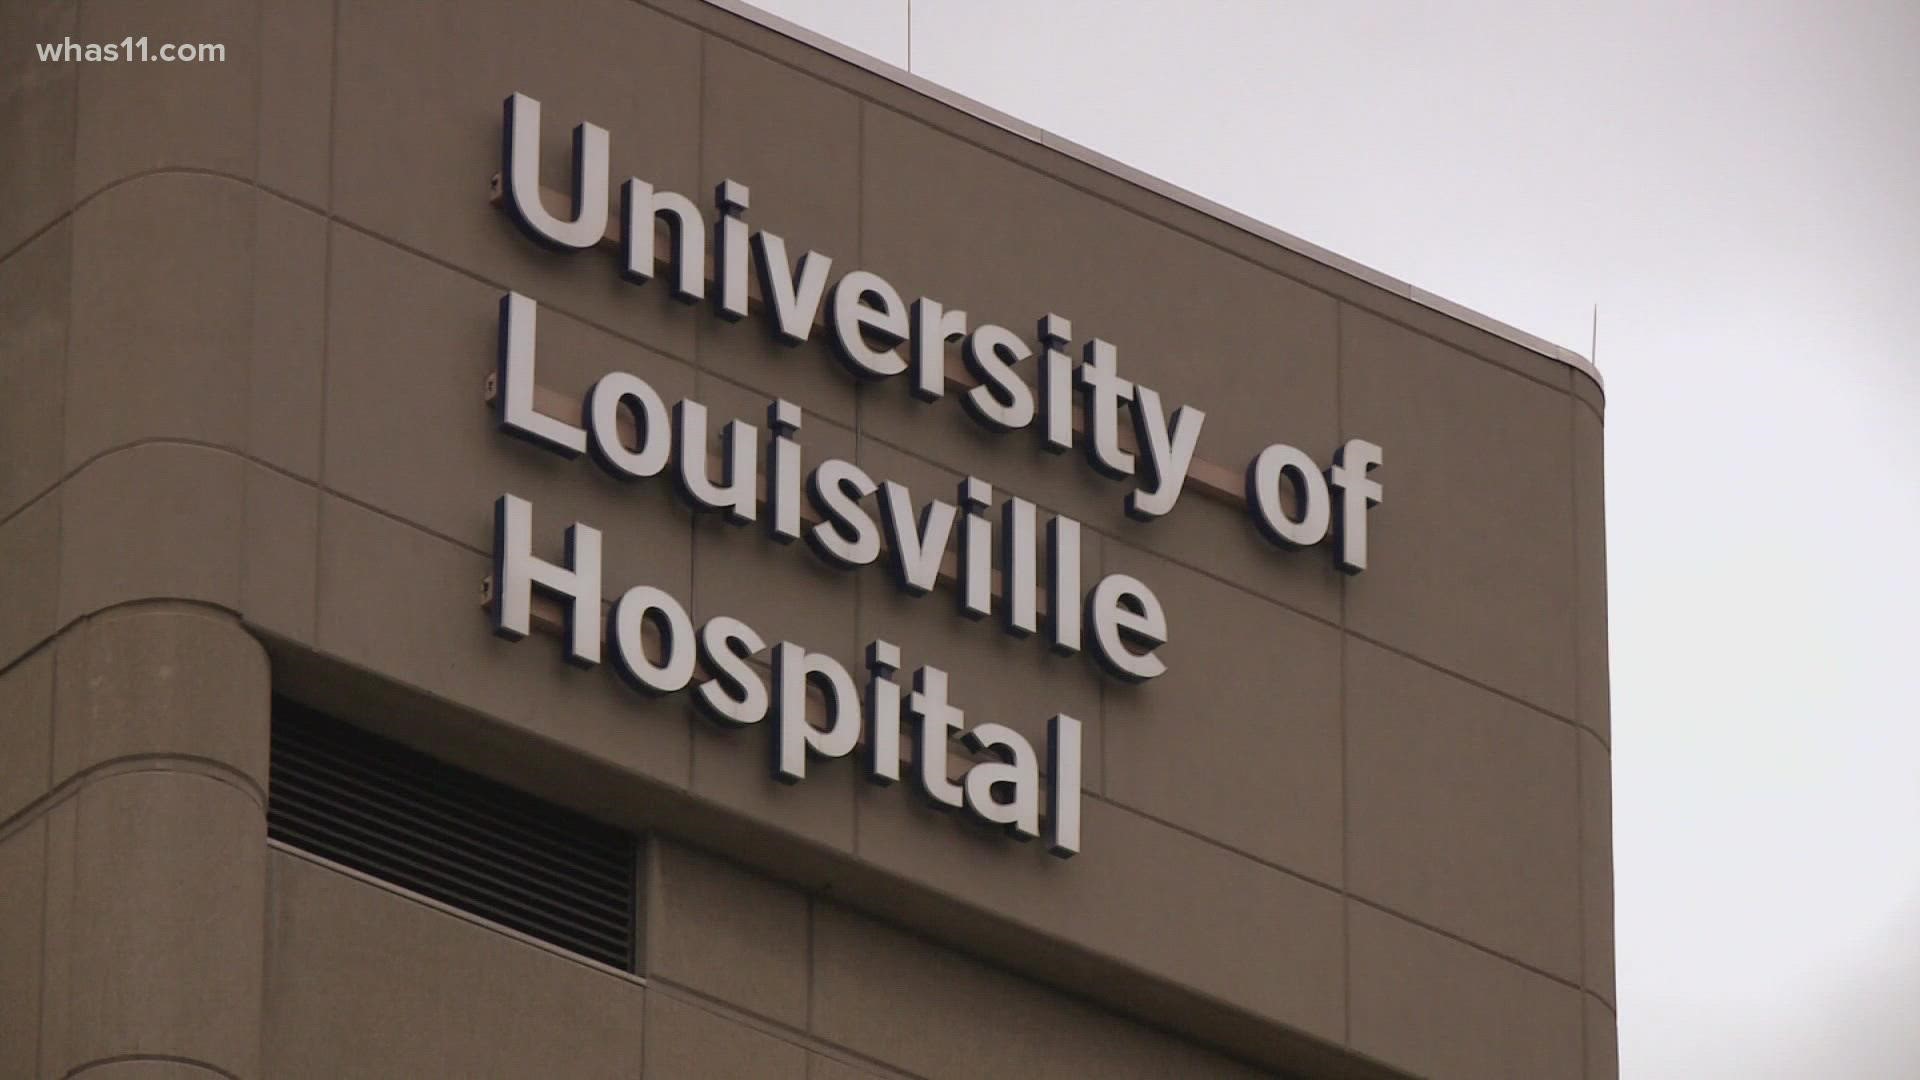 U of L Health said the number of COVID patients they are seeing are close to September and October peaks.